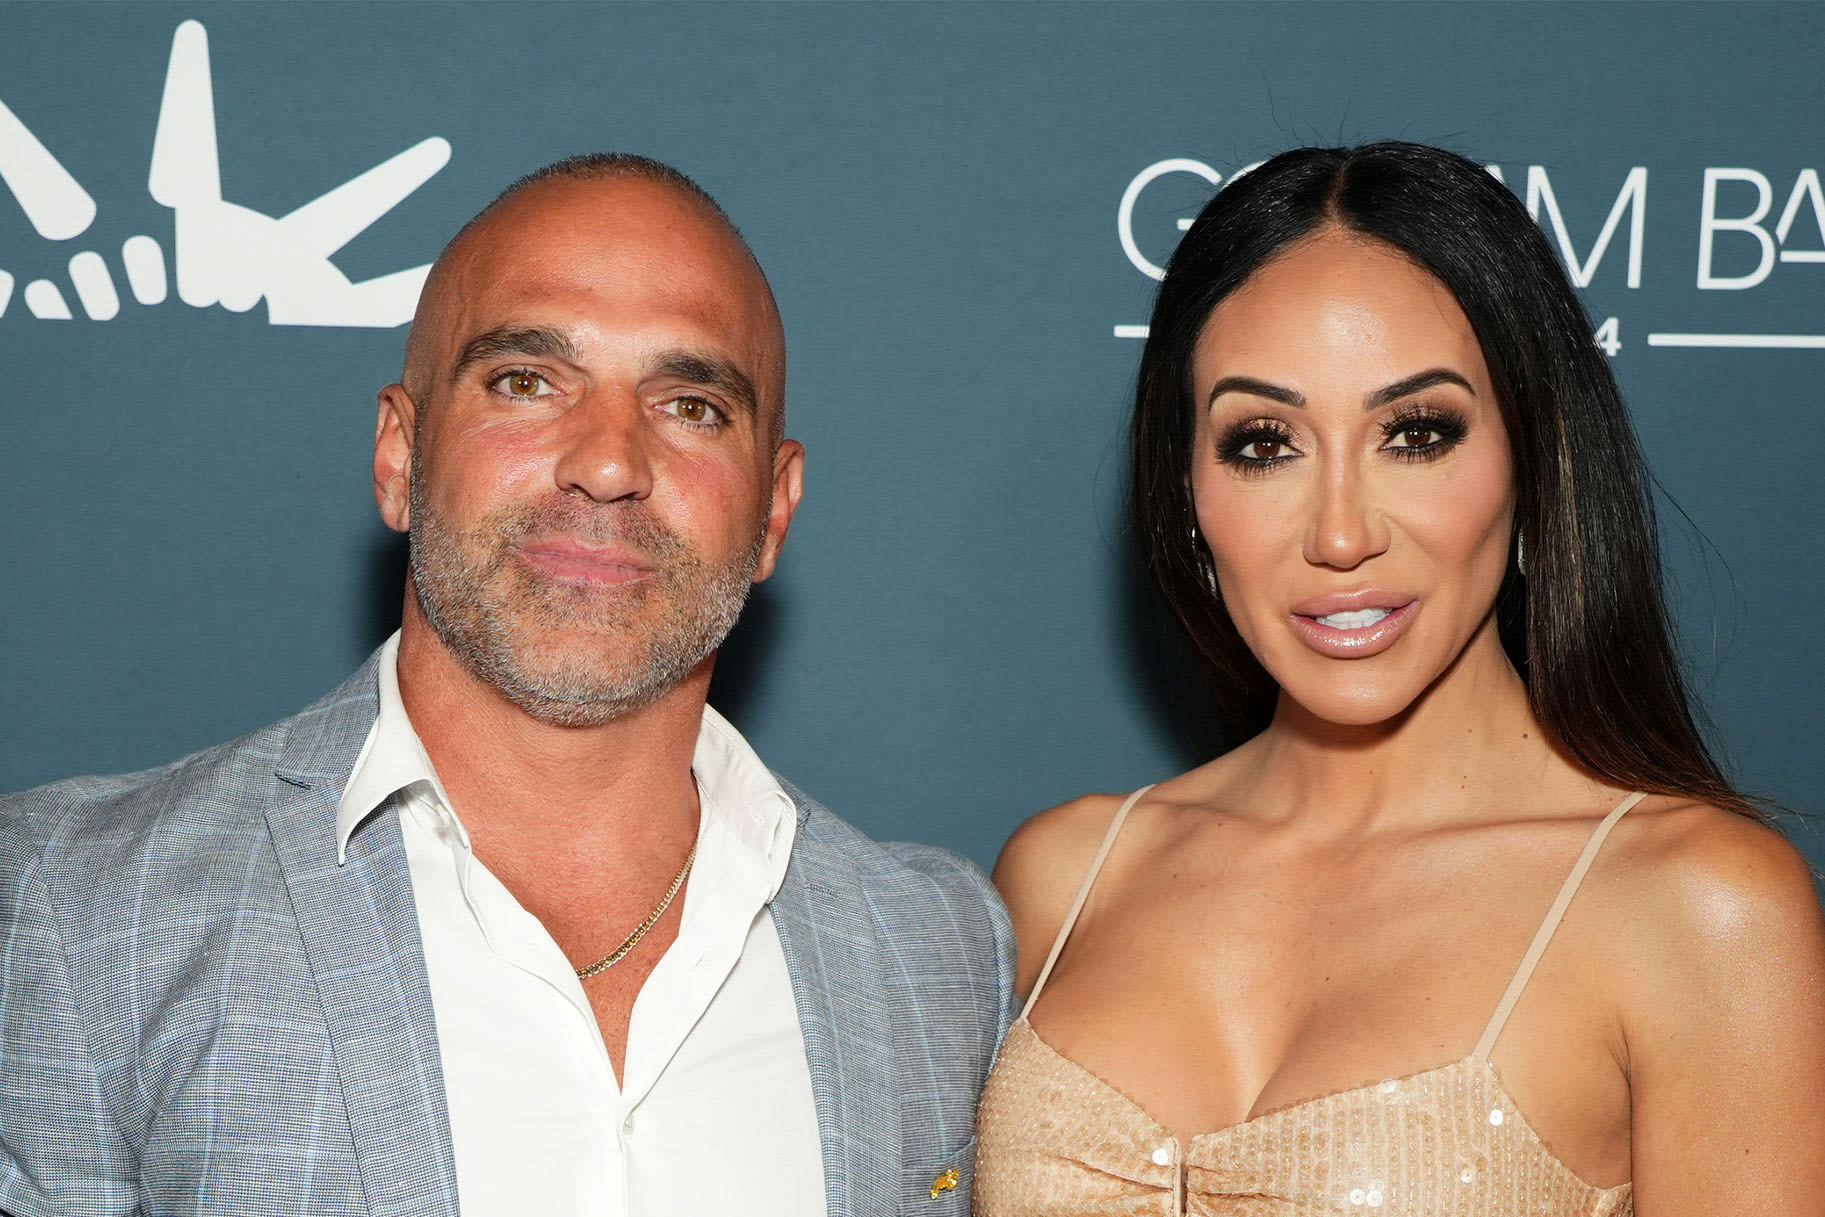 Joe Gorga Emotionally Reflects on His Rift with Teresa: "I'm Not Gonna Be There"